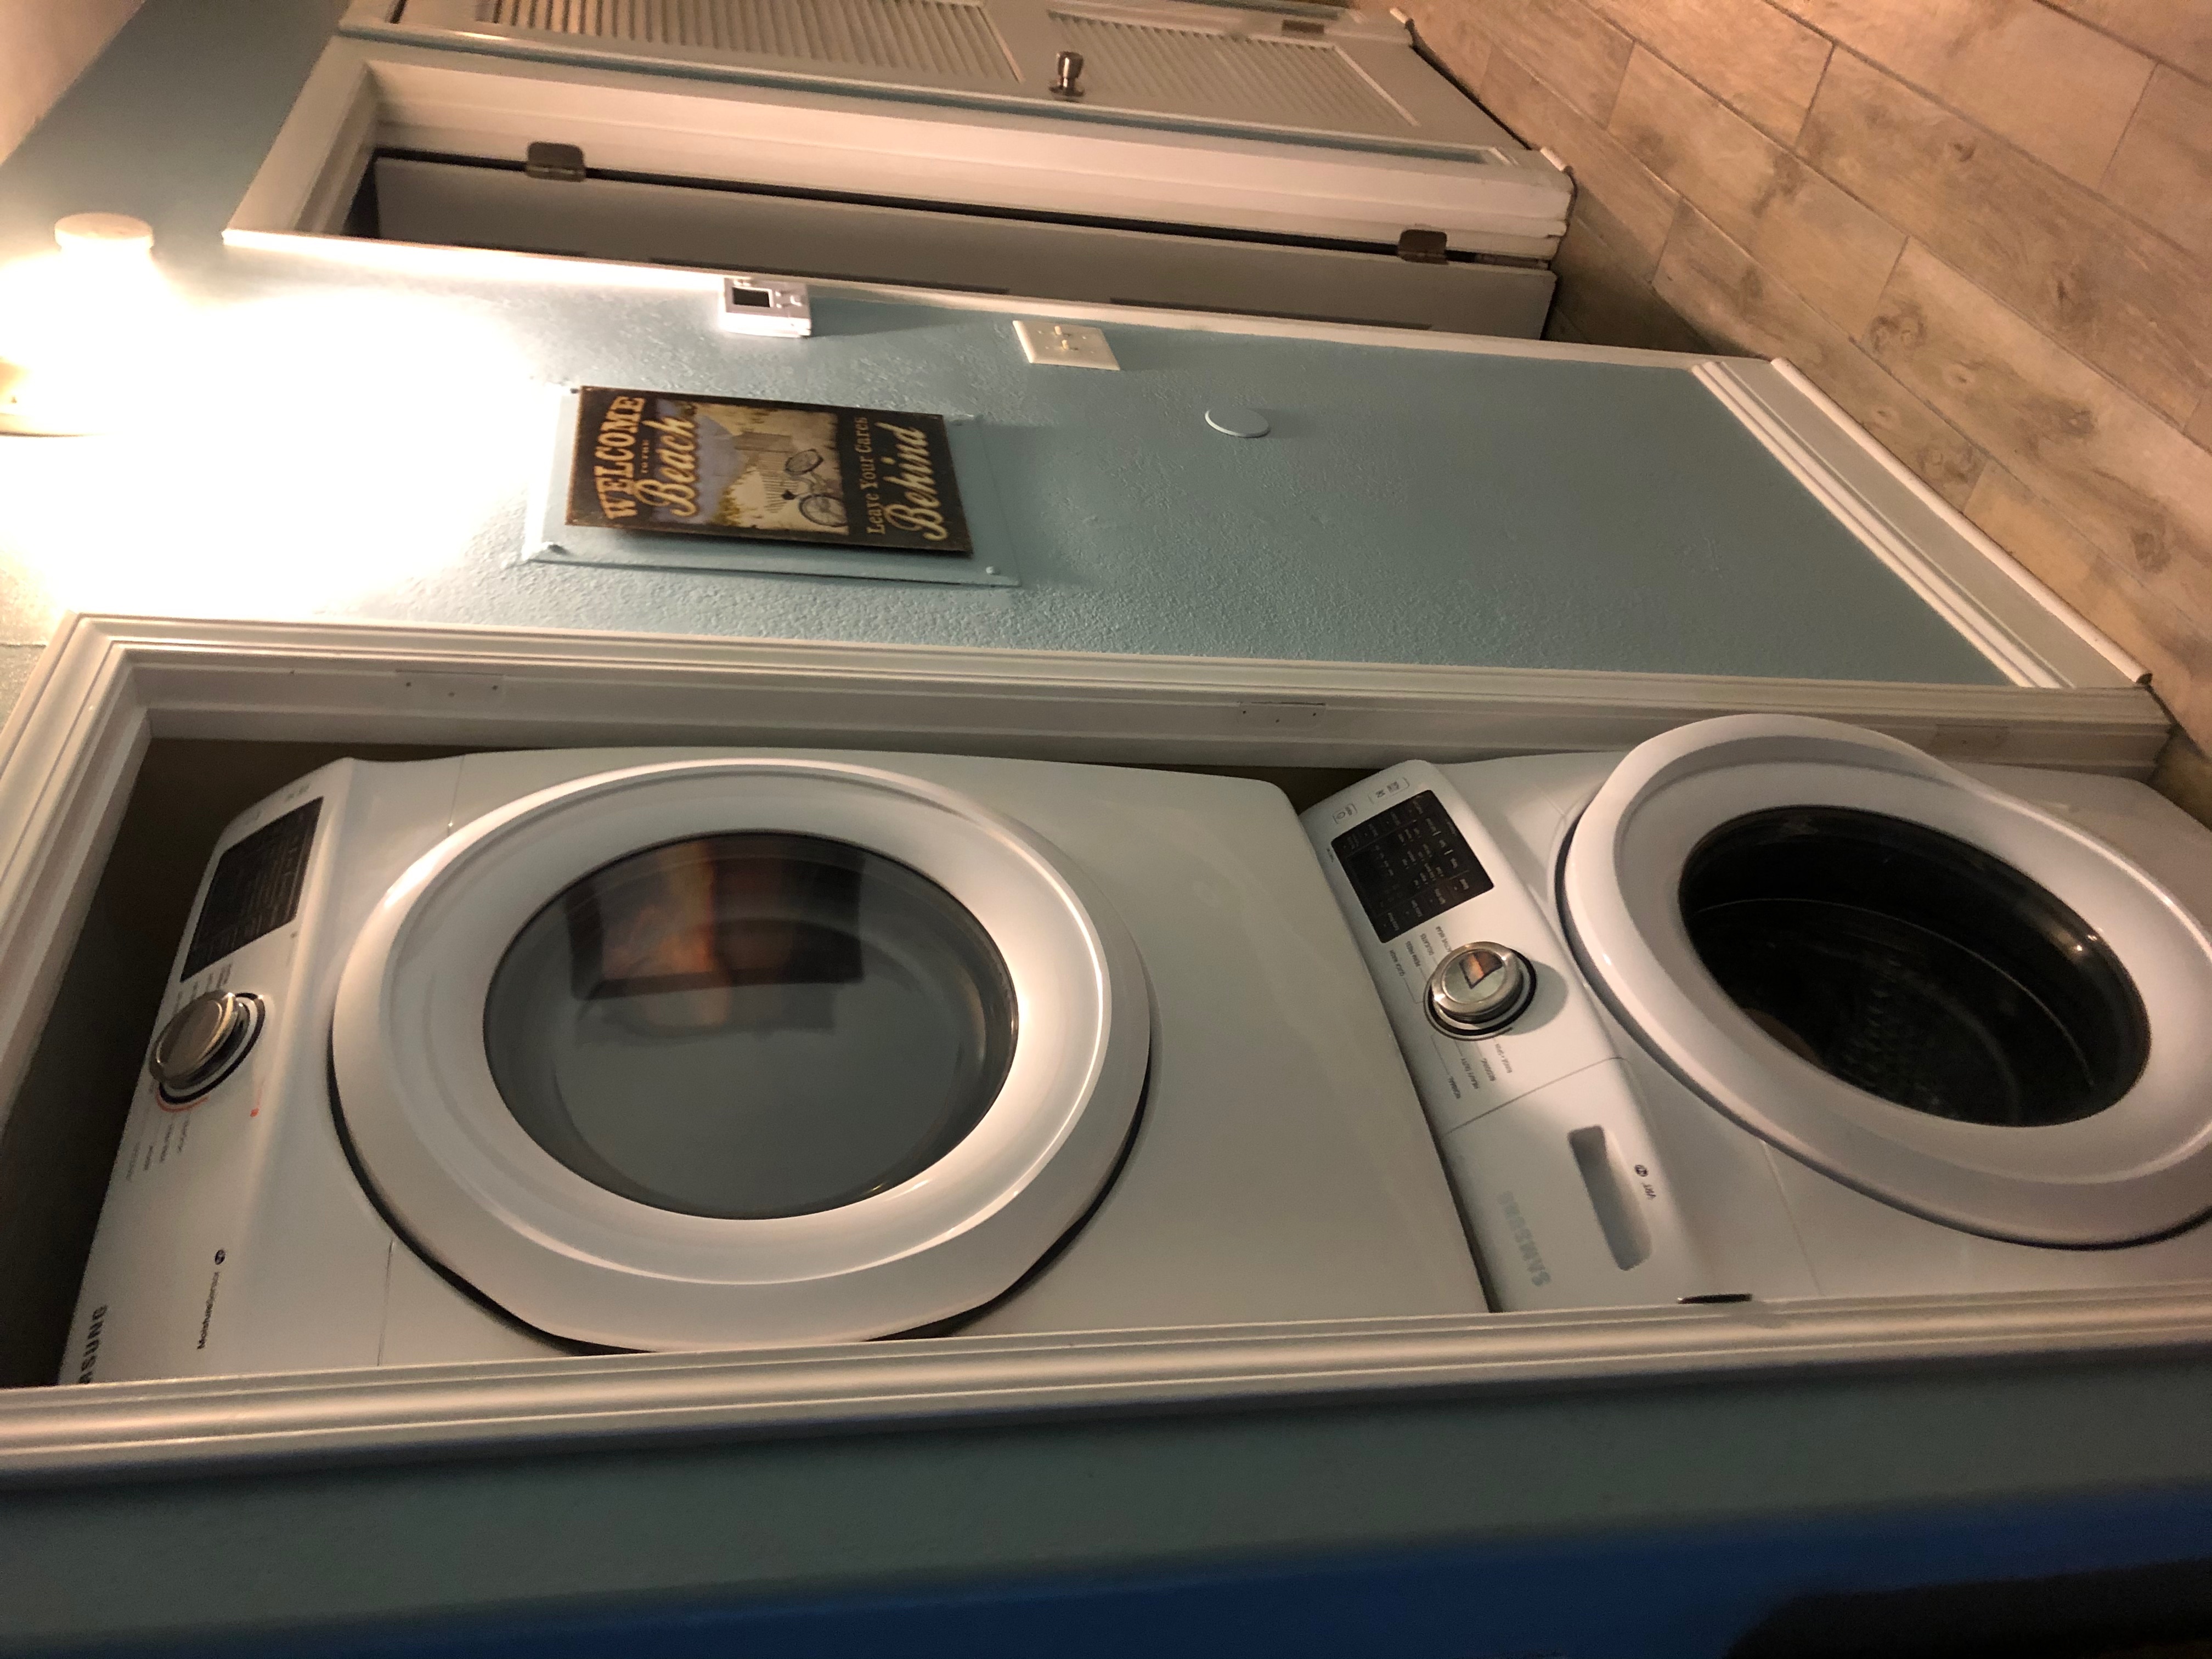 New front load full size washer and dryer